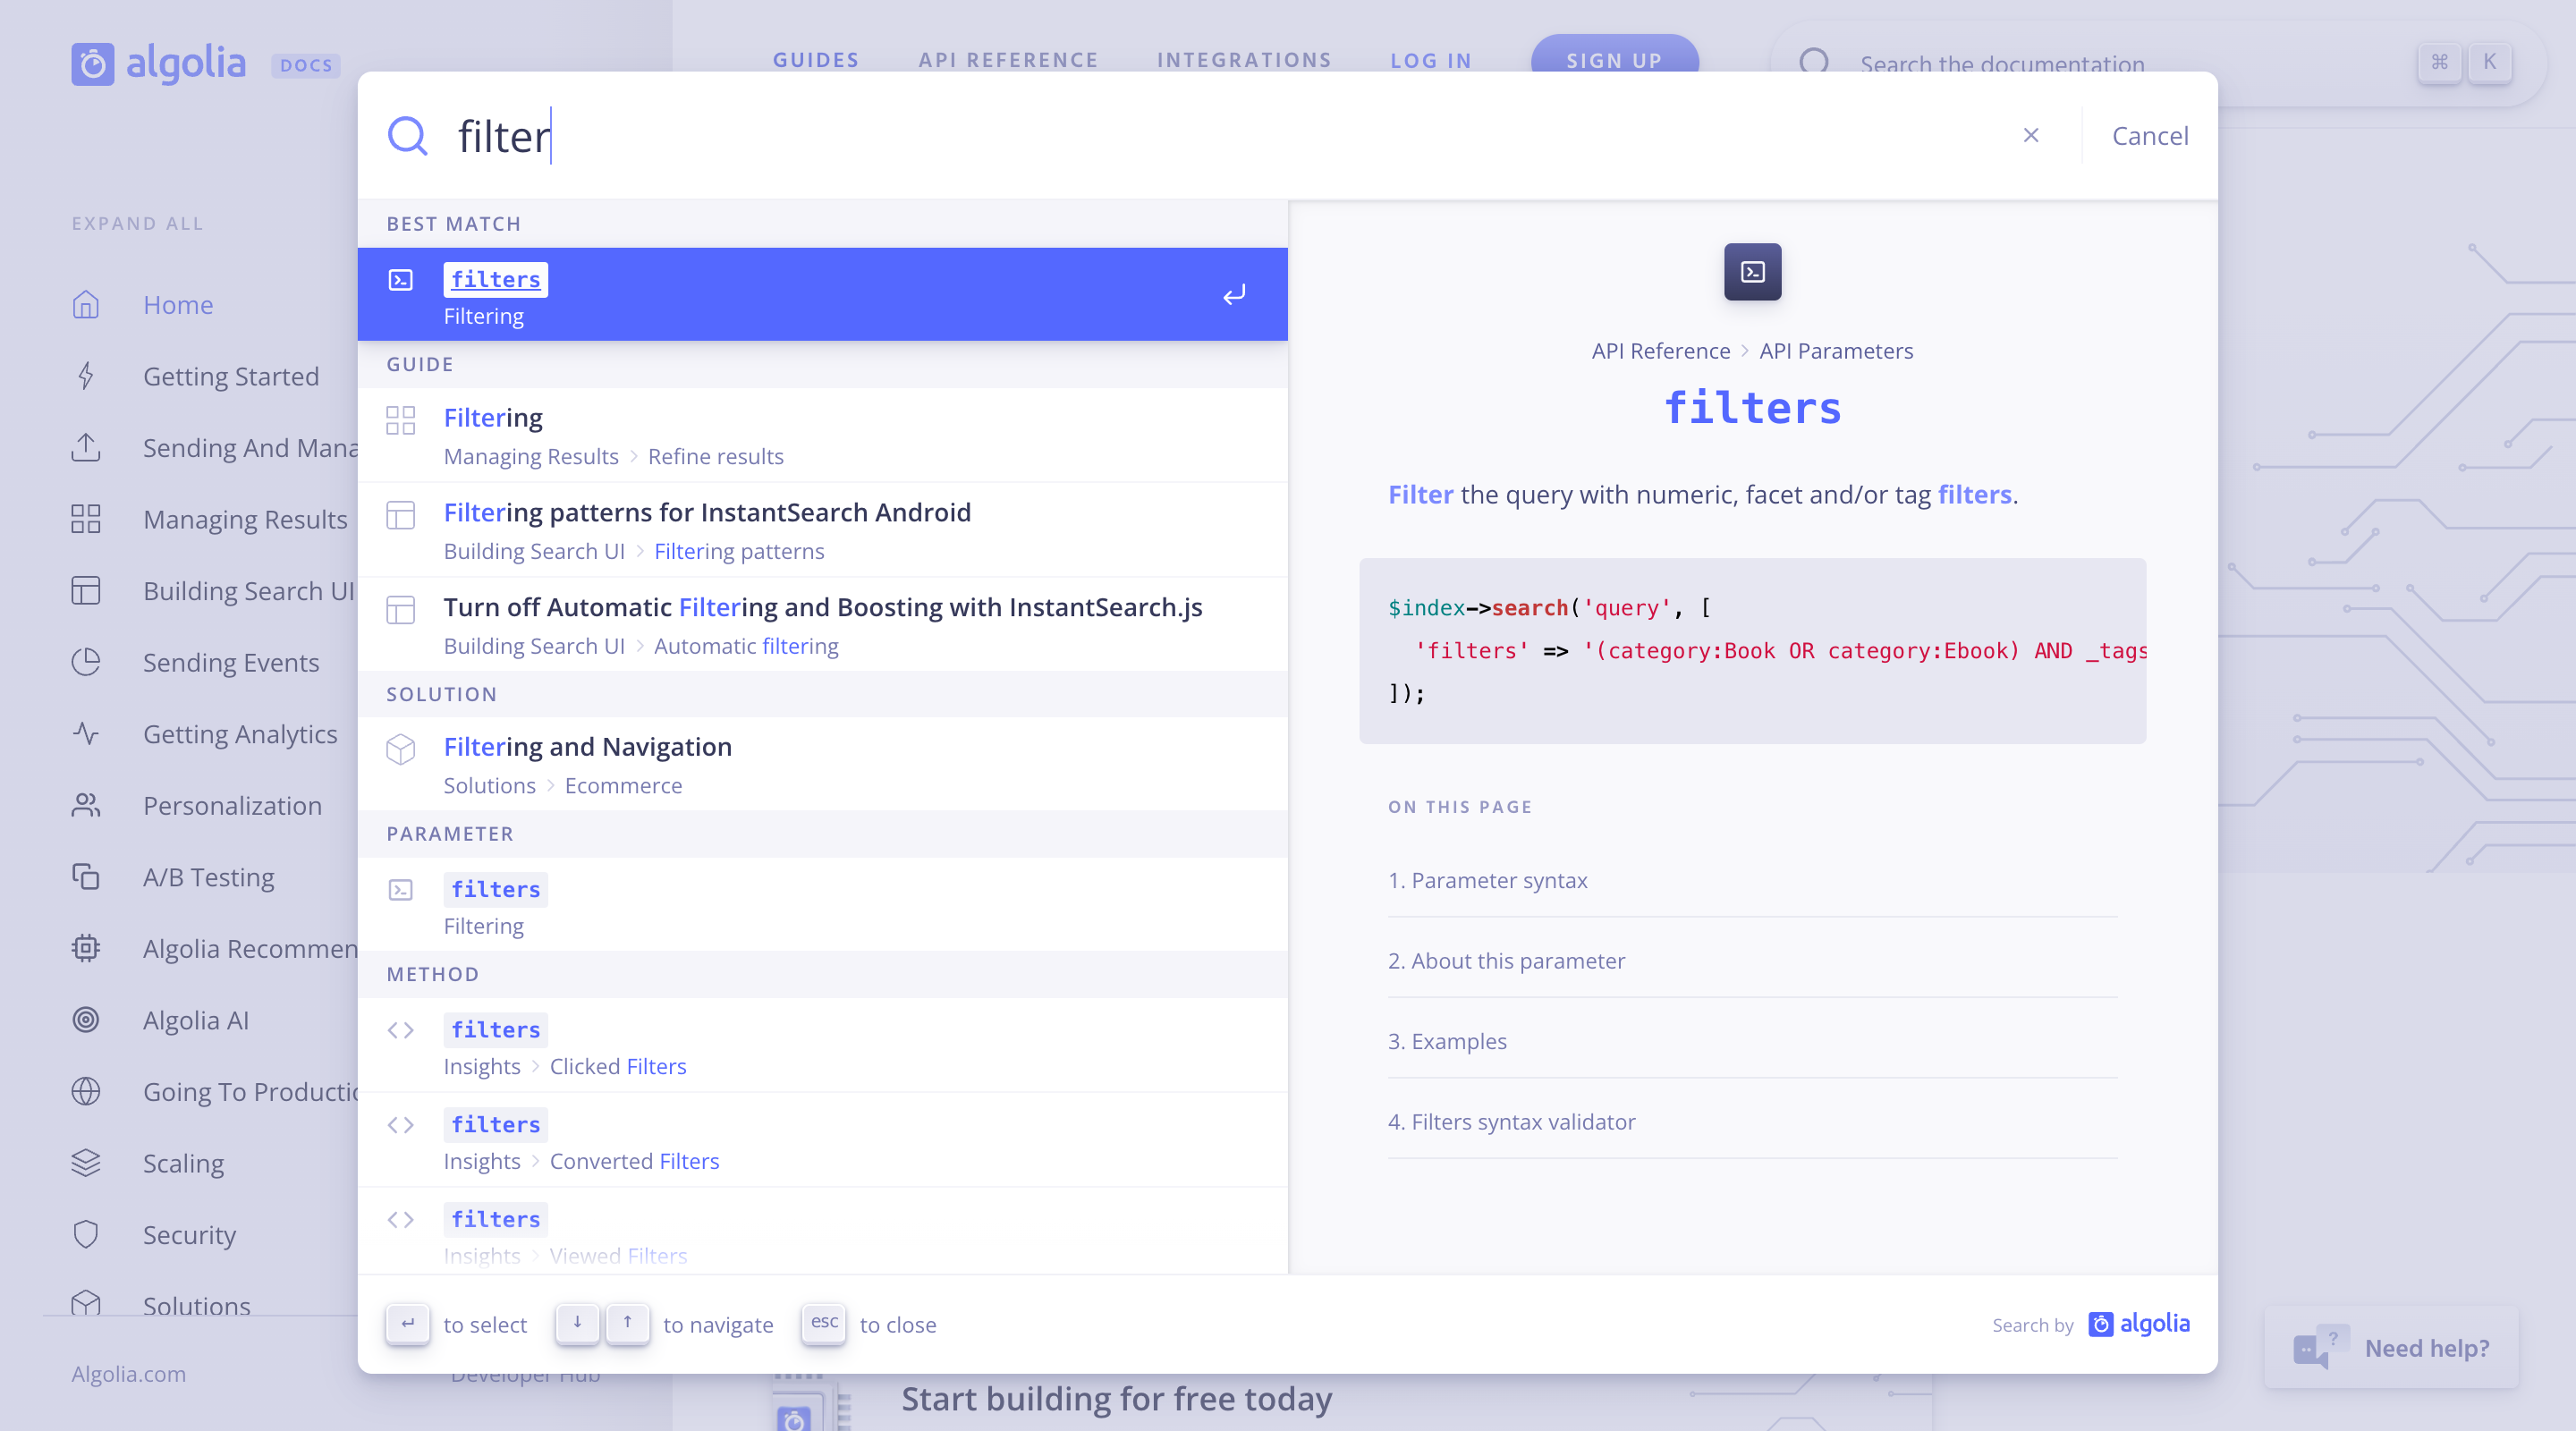 A screenshot of the Algolia documentation site with the search modal overlay active. The user has searched for the 'filter' keyword and the results are listed on the left of the modal. On the right side more information about the selected result is displayed.